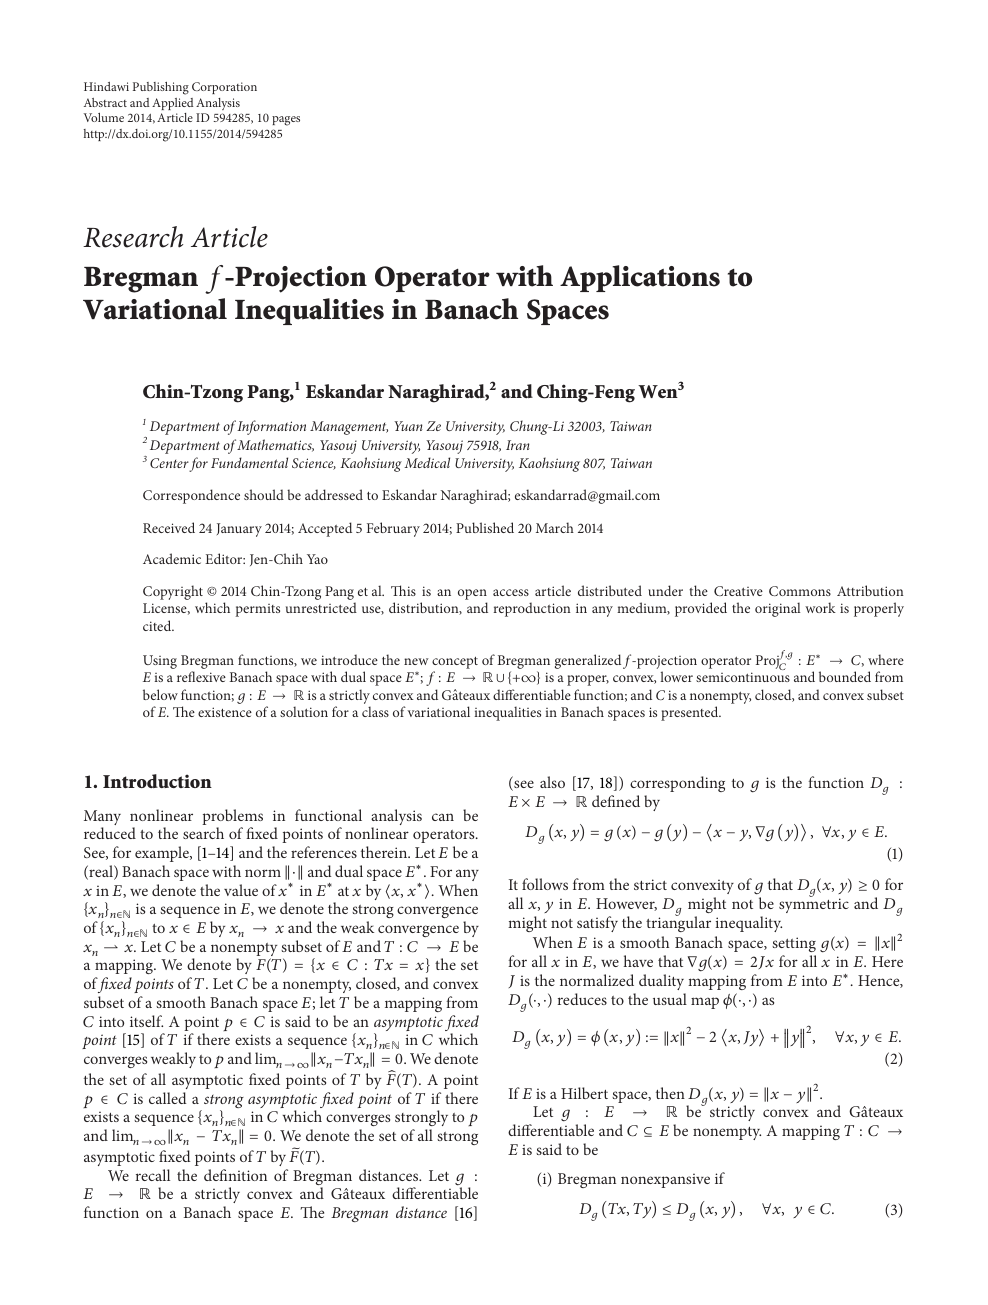 Bregman Projection Operator With Applications To Variational Inequalities In Banach Spaces Topic Of Research Paper In Mathematics Download Scholarly Article Pdf And Read For Free On Cyberleninka Open Science Hub